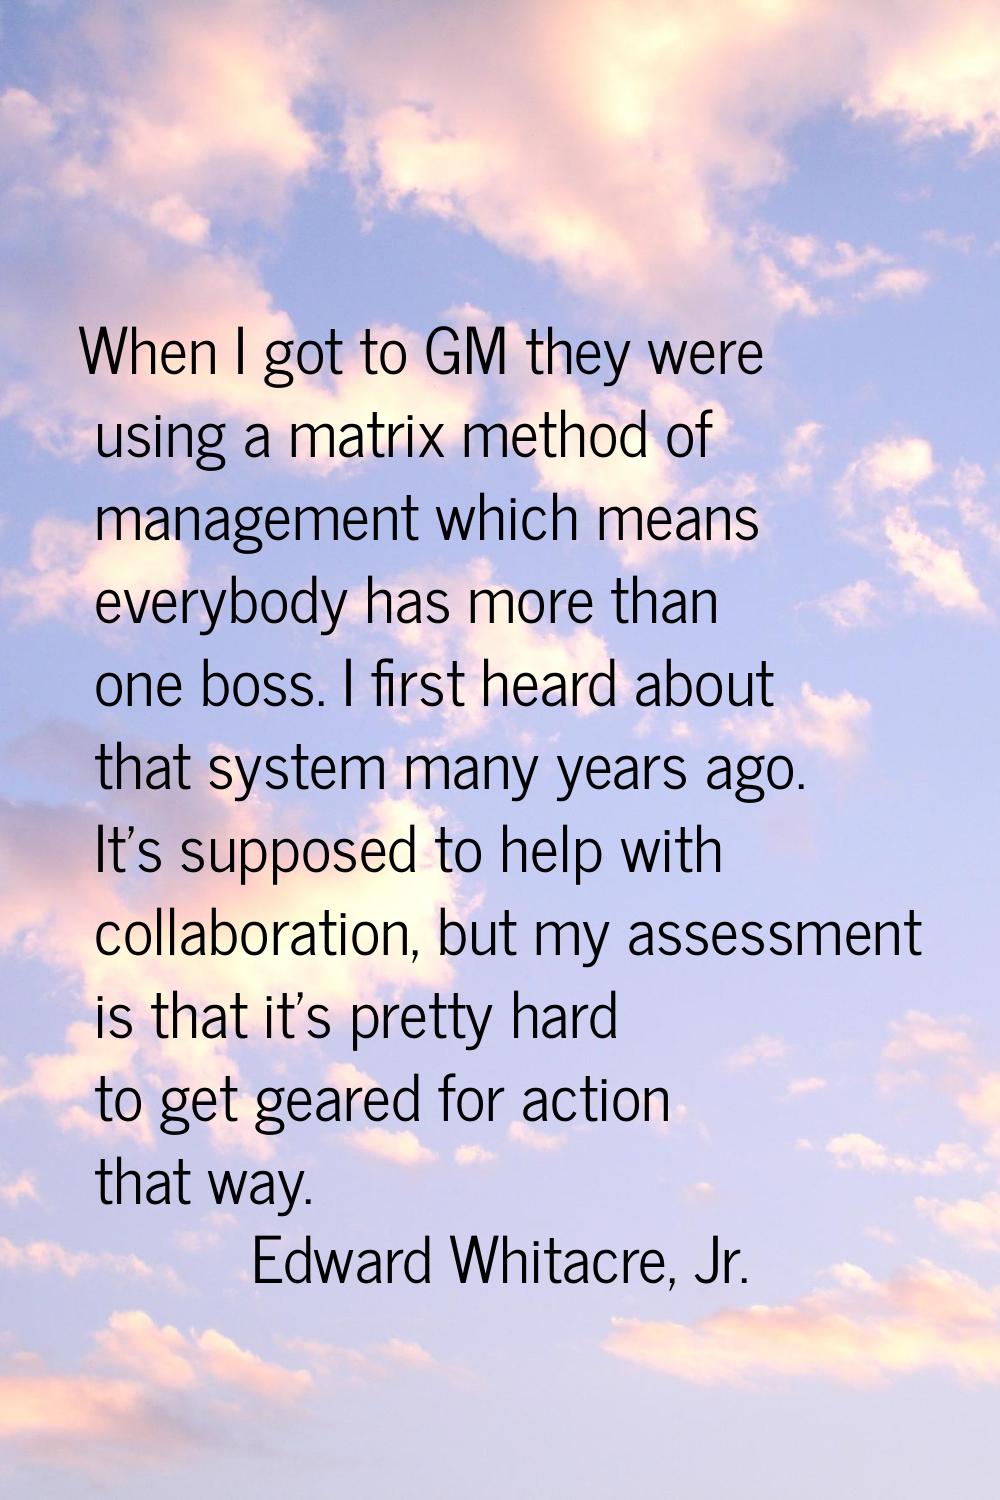 When I got to GM they were using a matrix method of management which means everybody has more than 